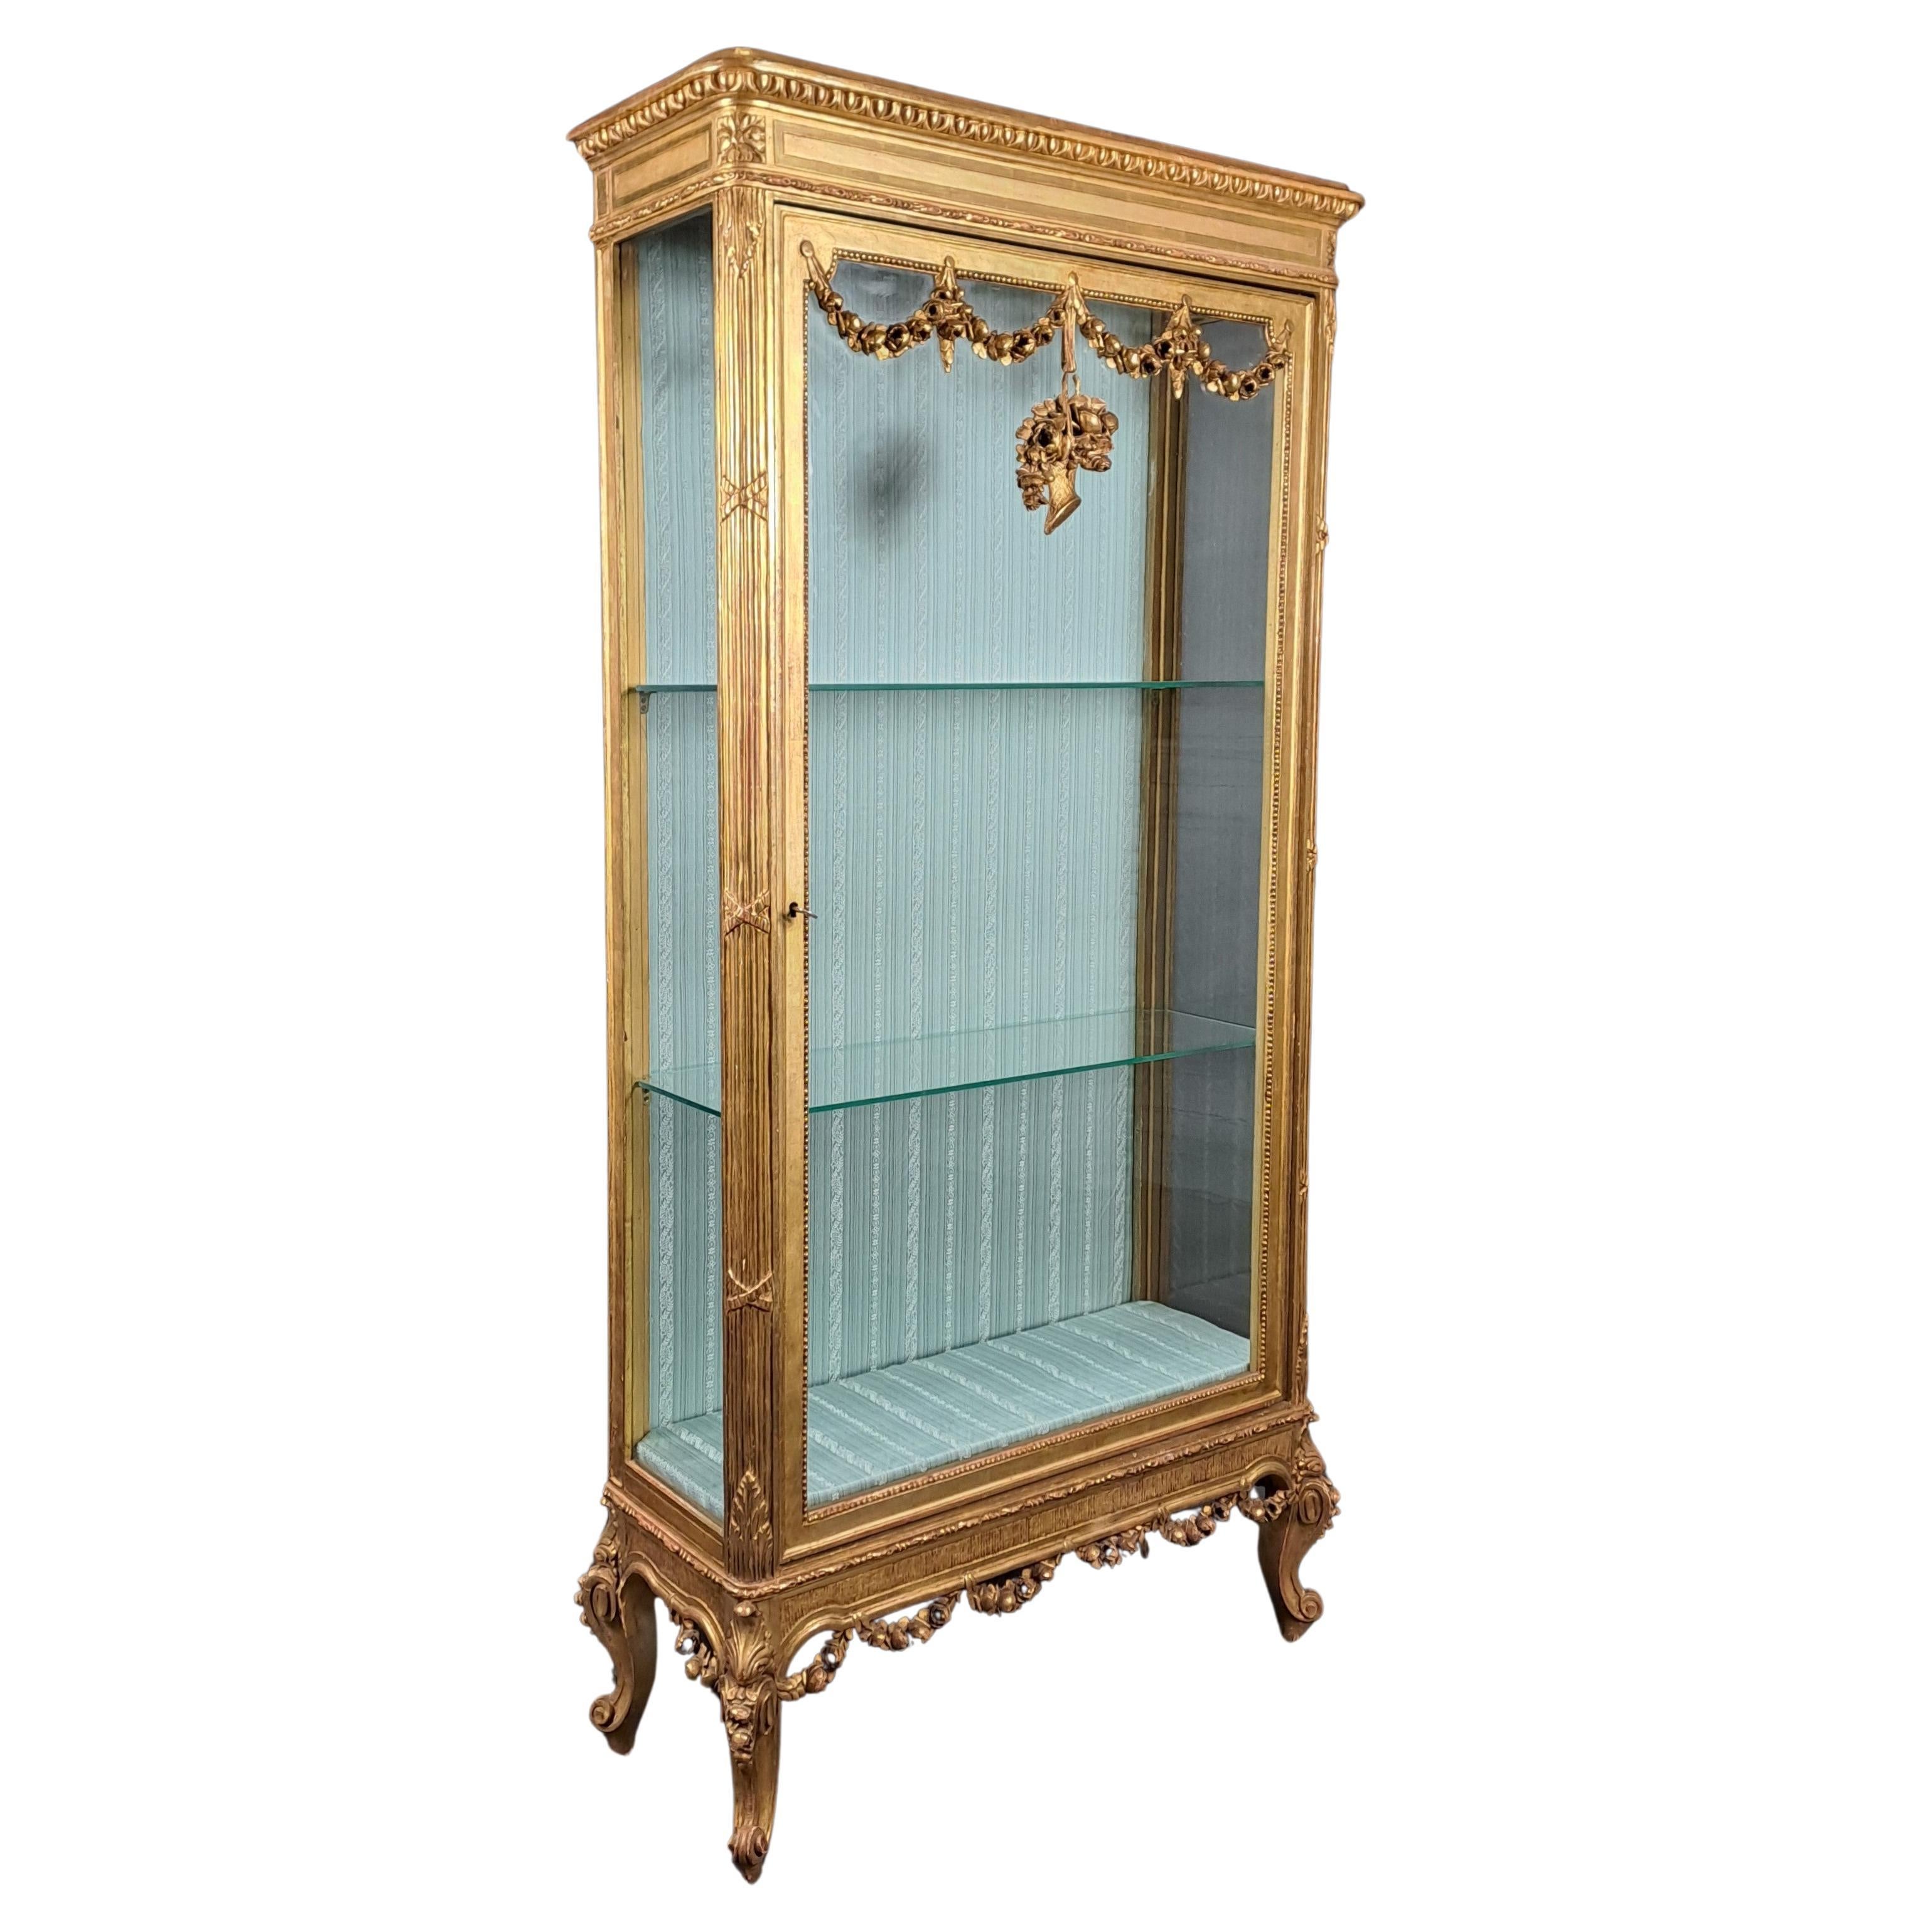 Transition Style Vitrine In Golden Wood From The 19th Century